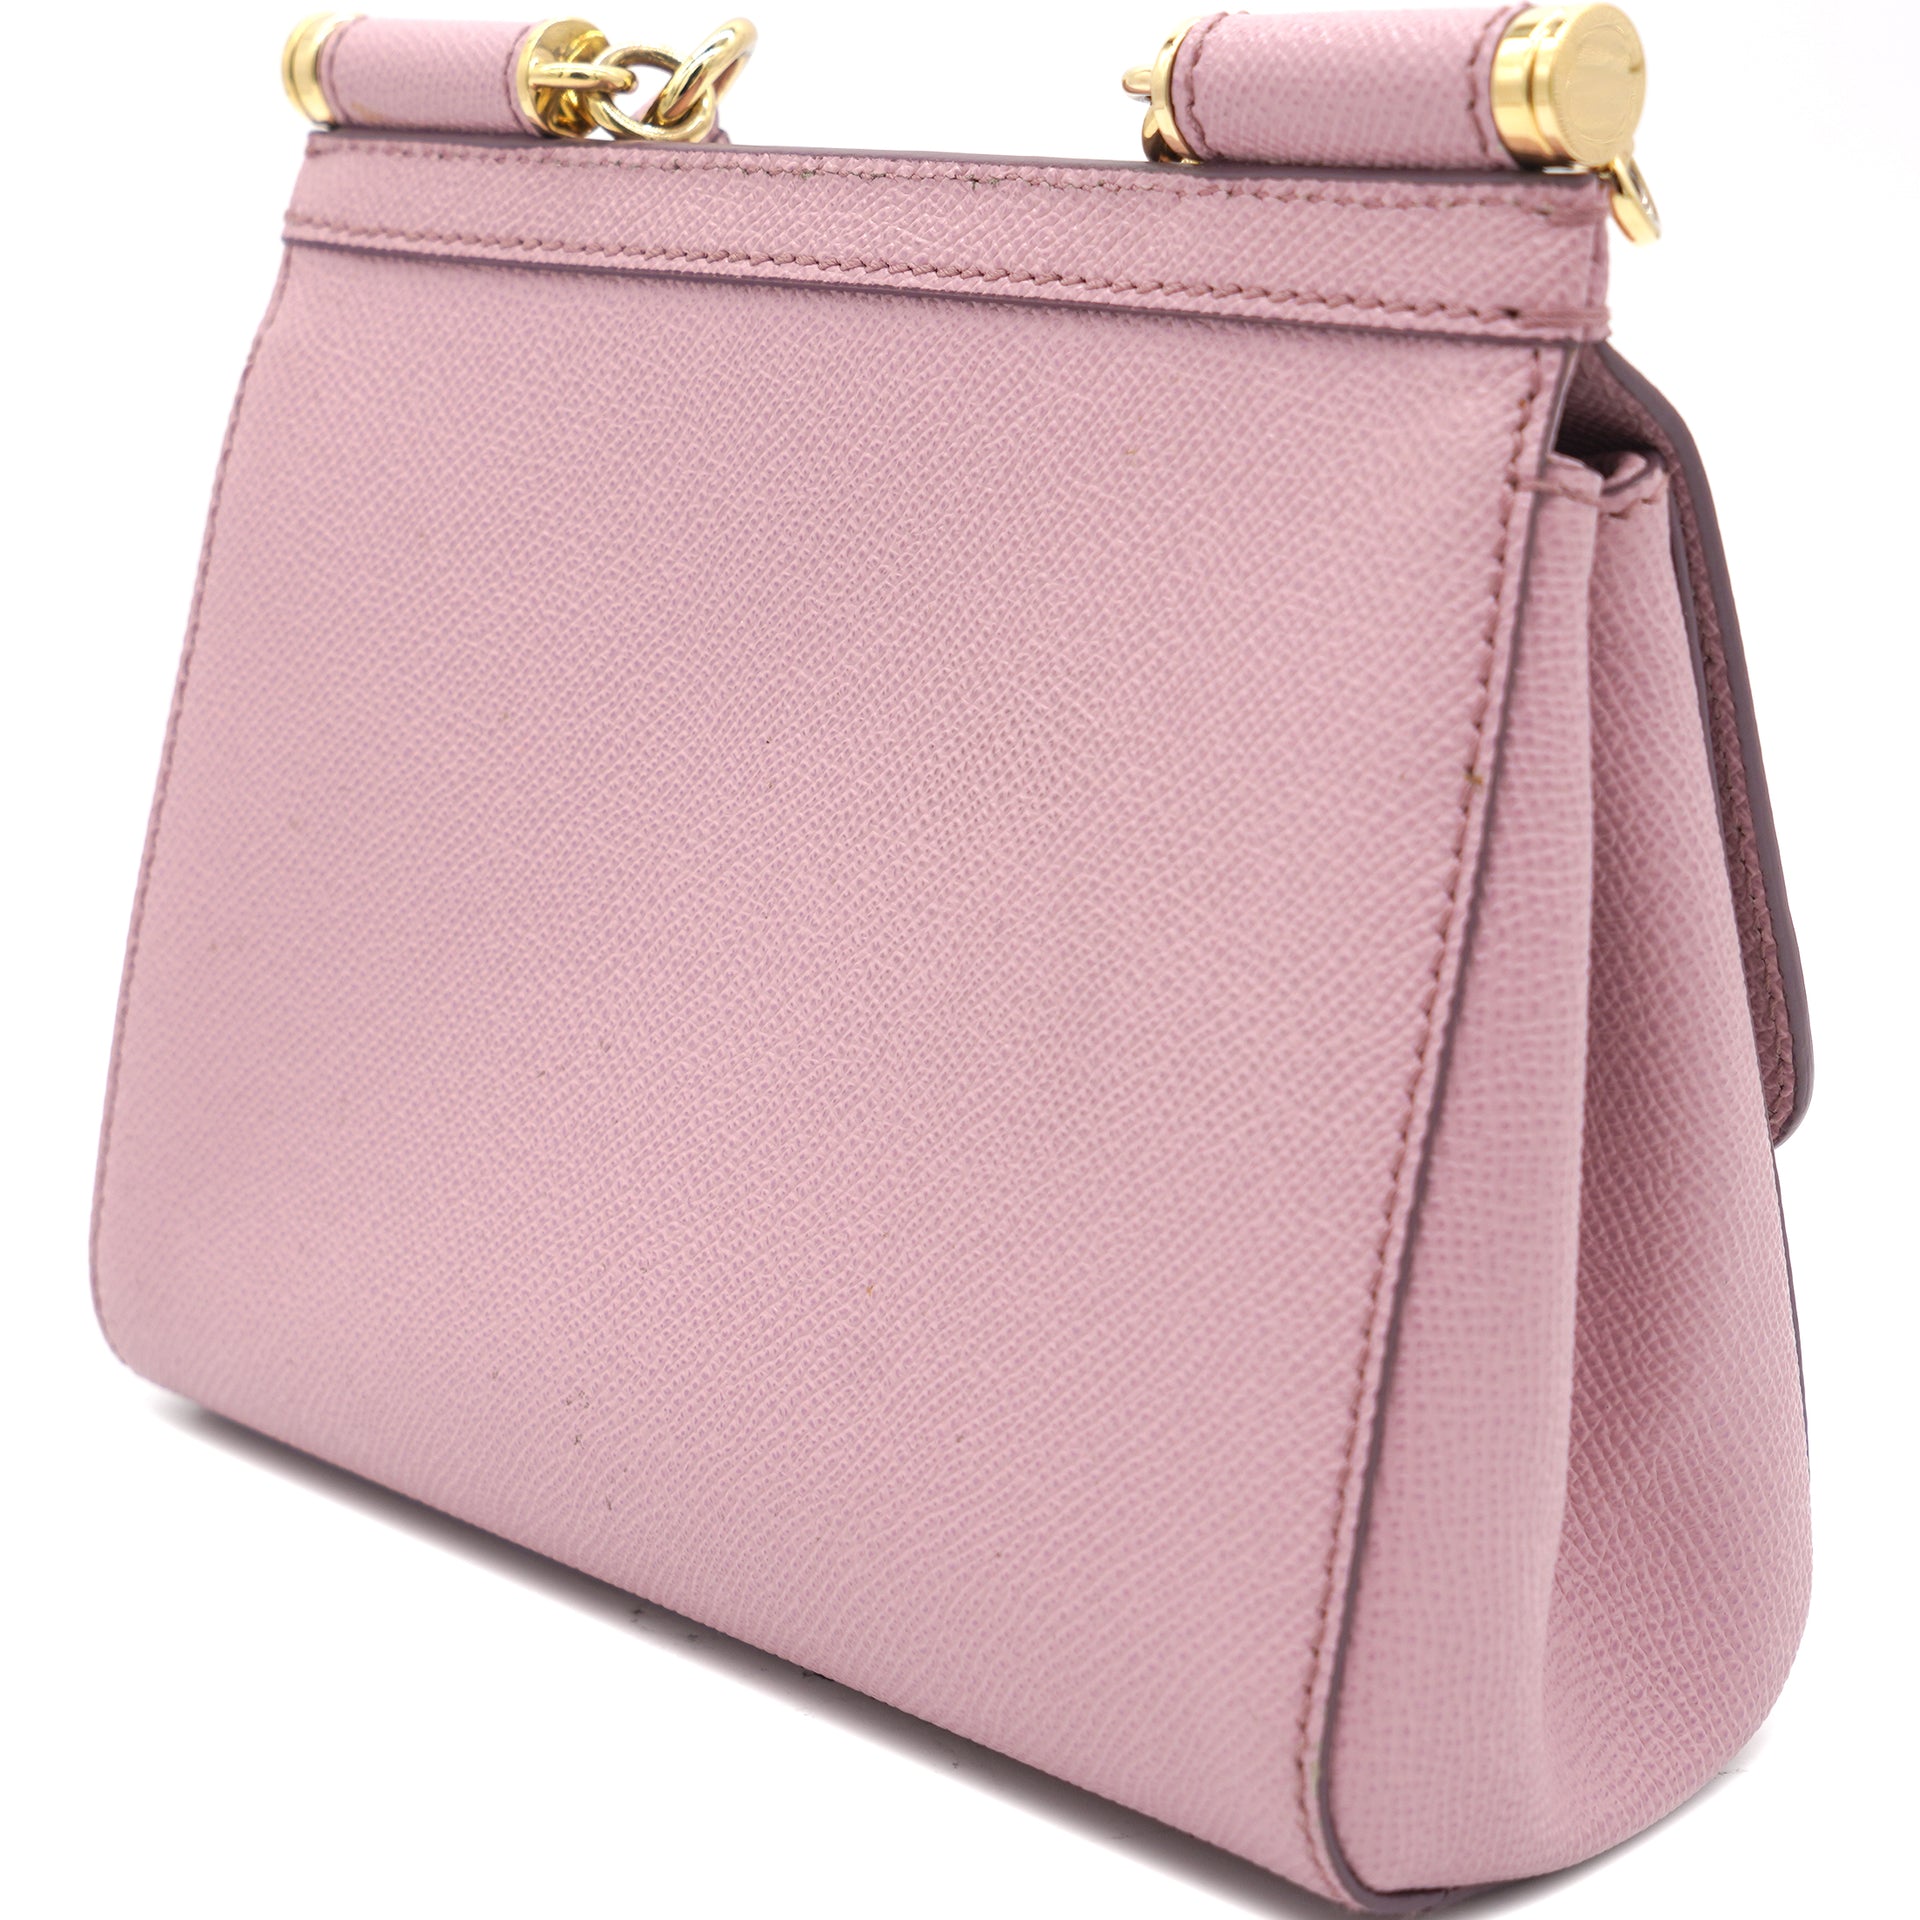 Dauphine Small Miss Sicily Satchel Rosa Carne